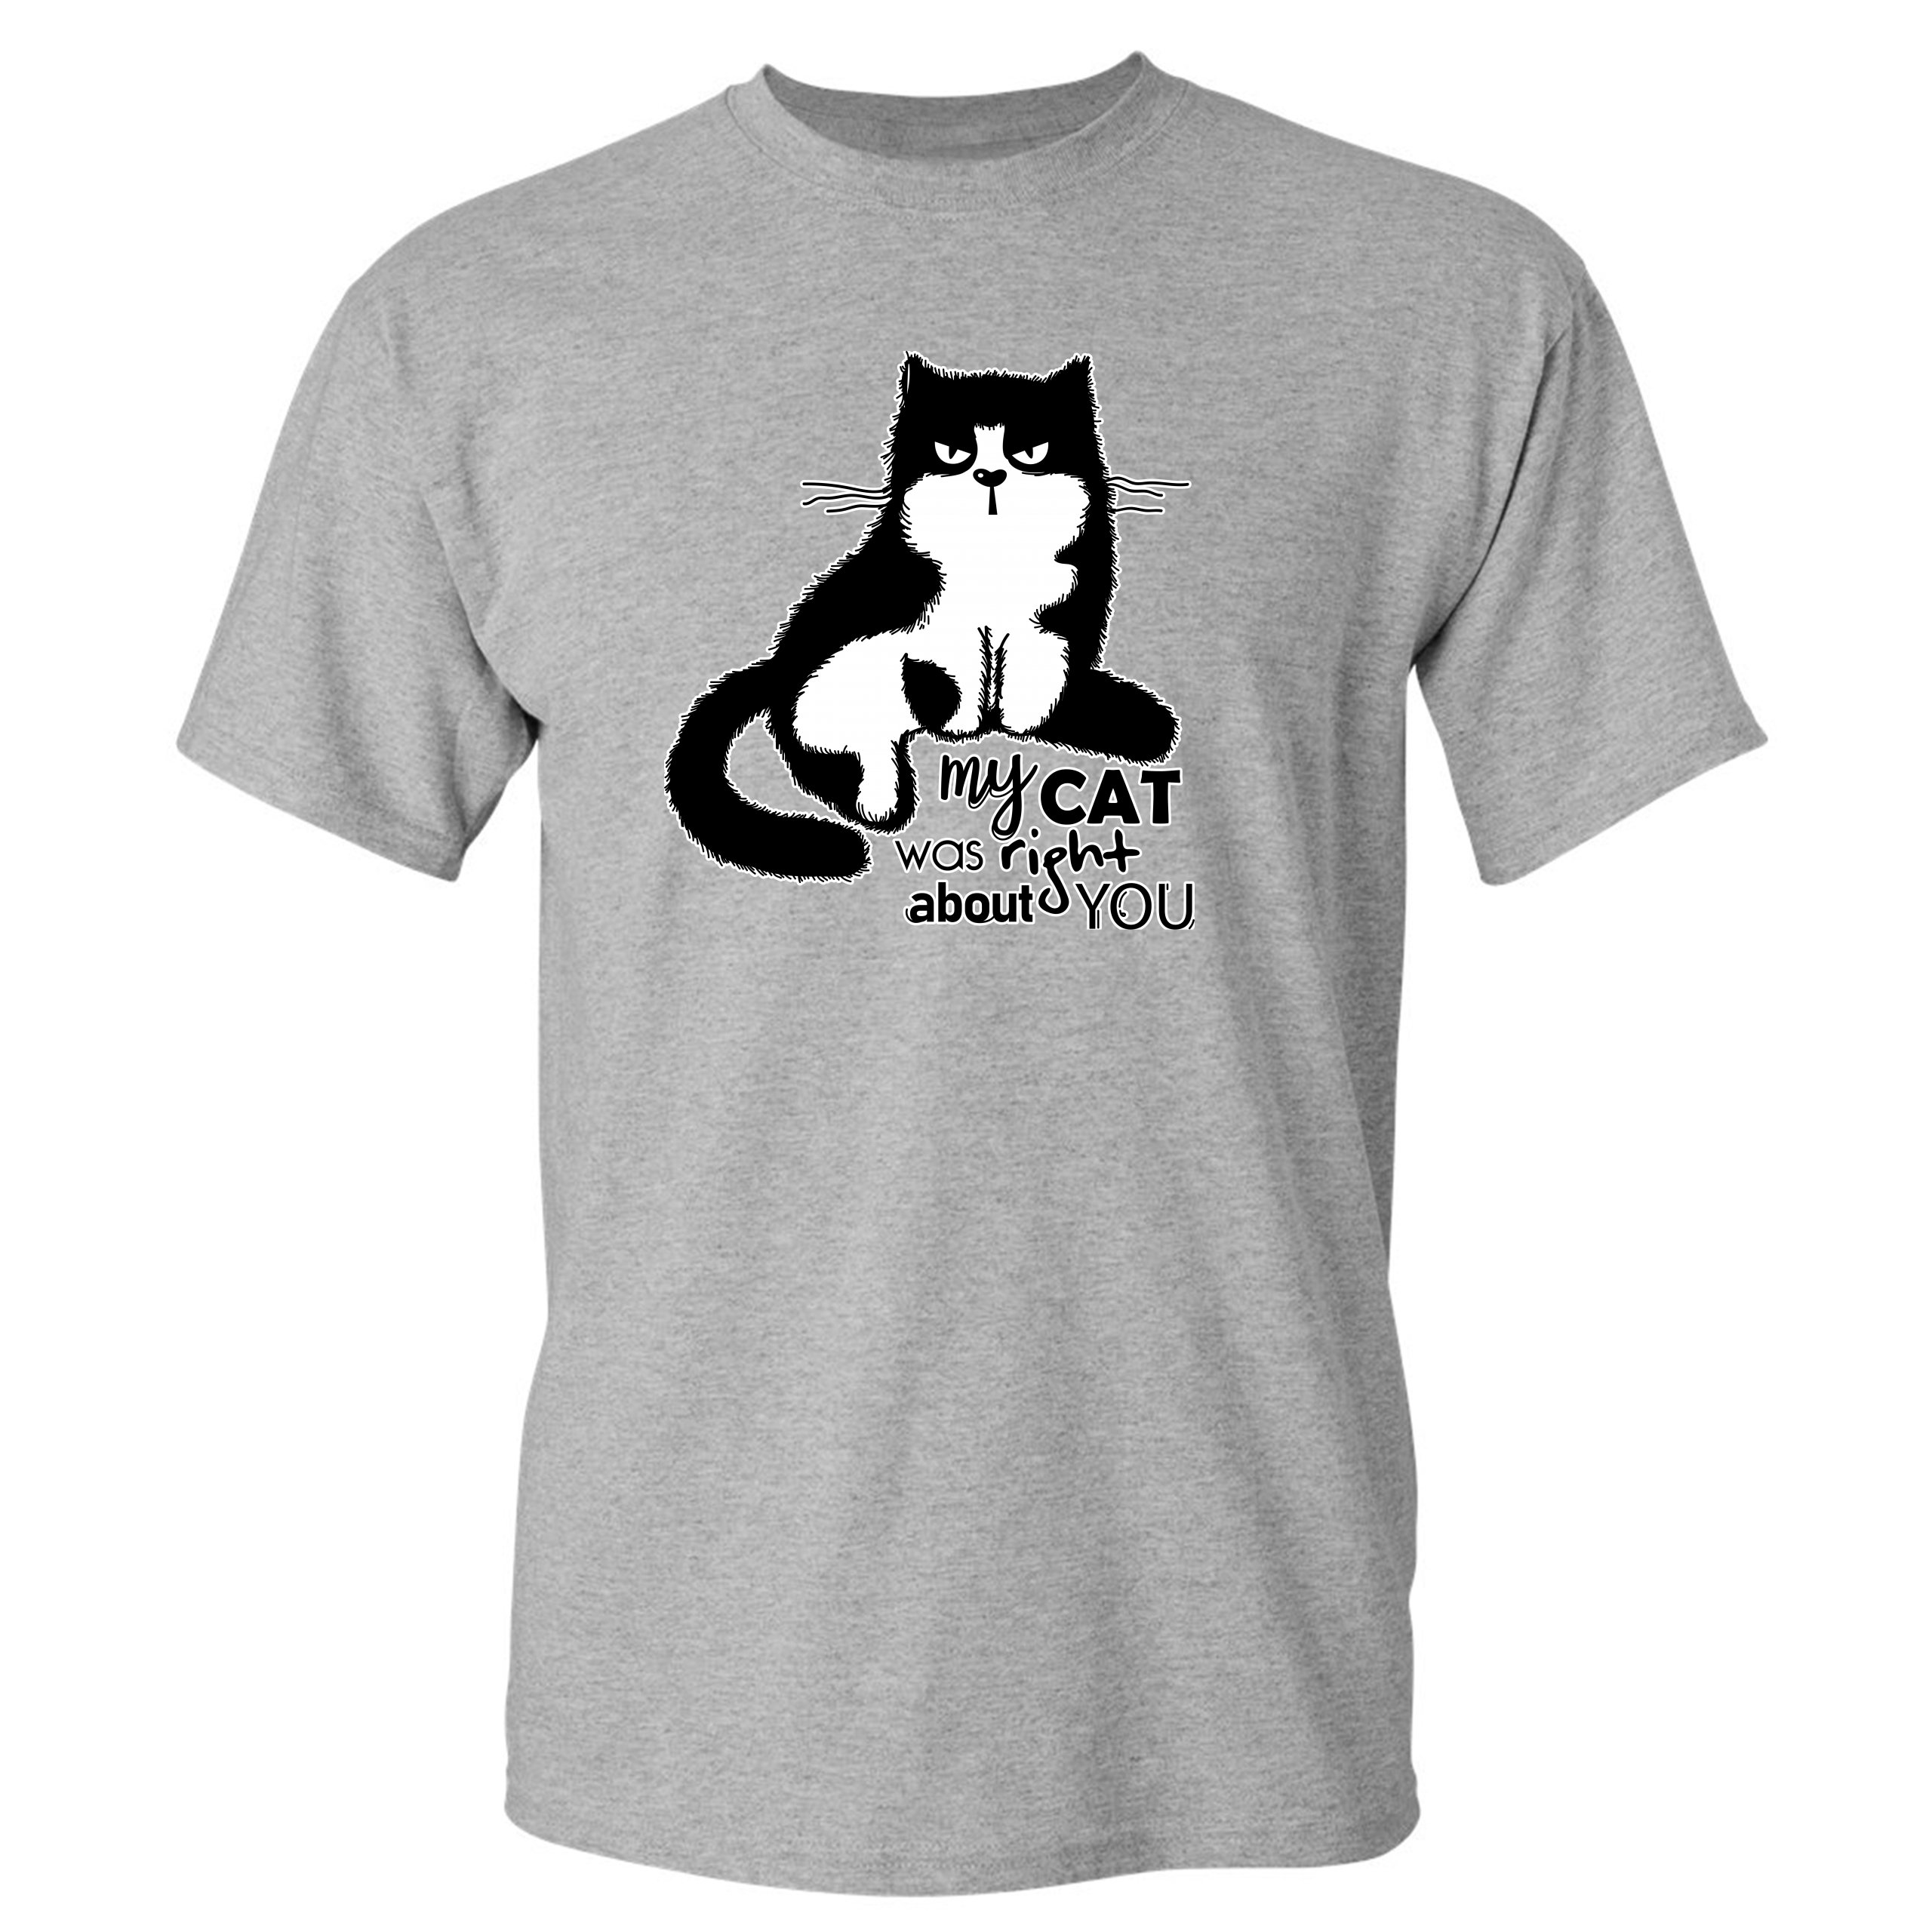 My Cat Was Right About You T-shirt Cat Lover Funny Kitty Kitten Men's ...